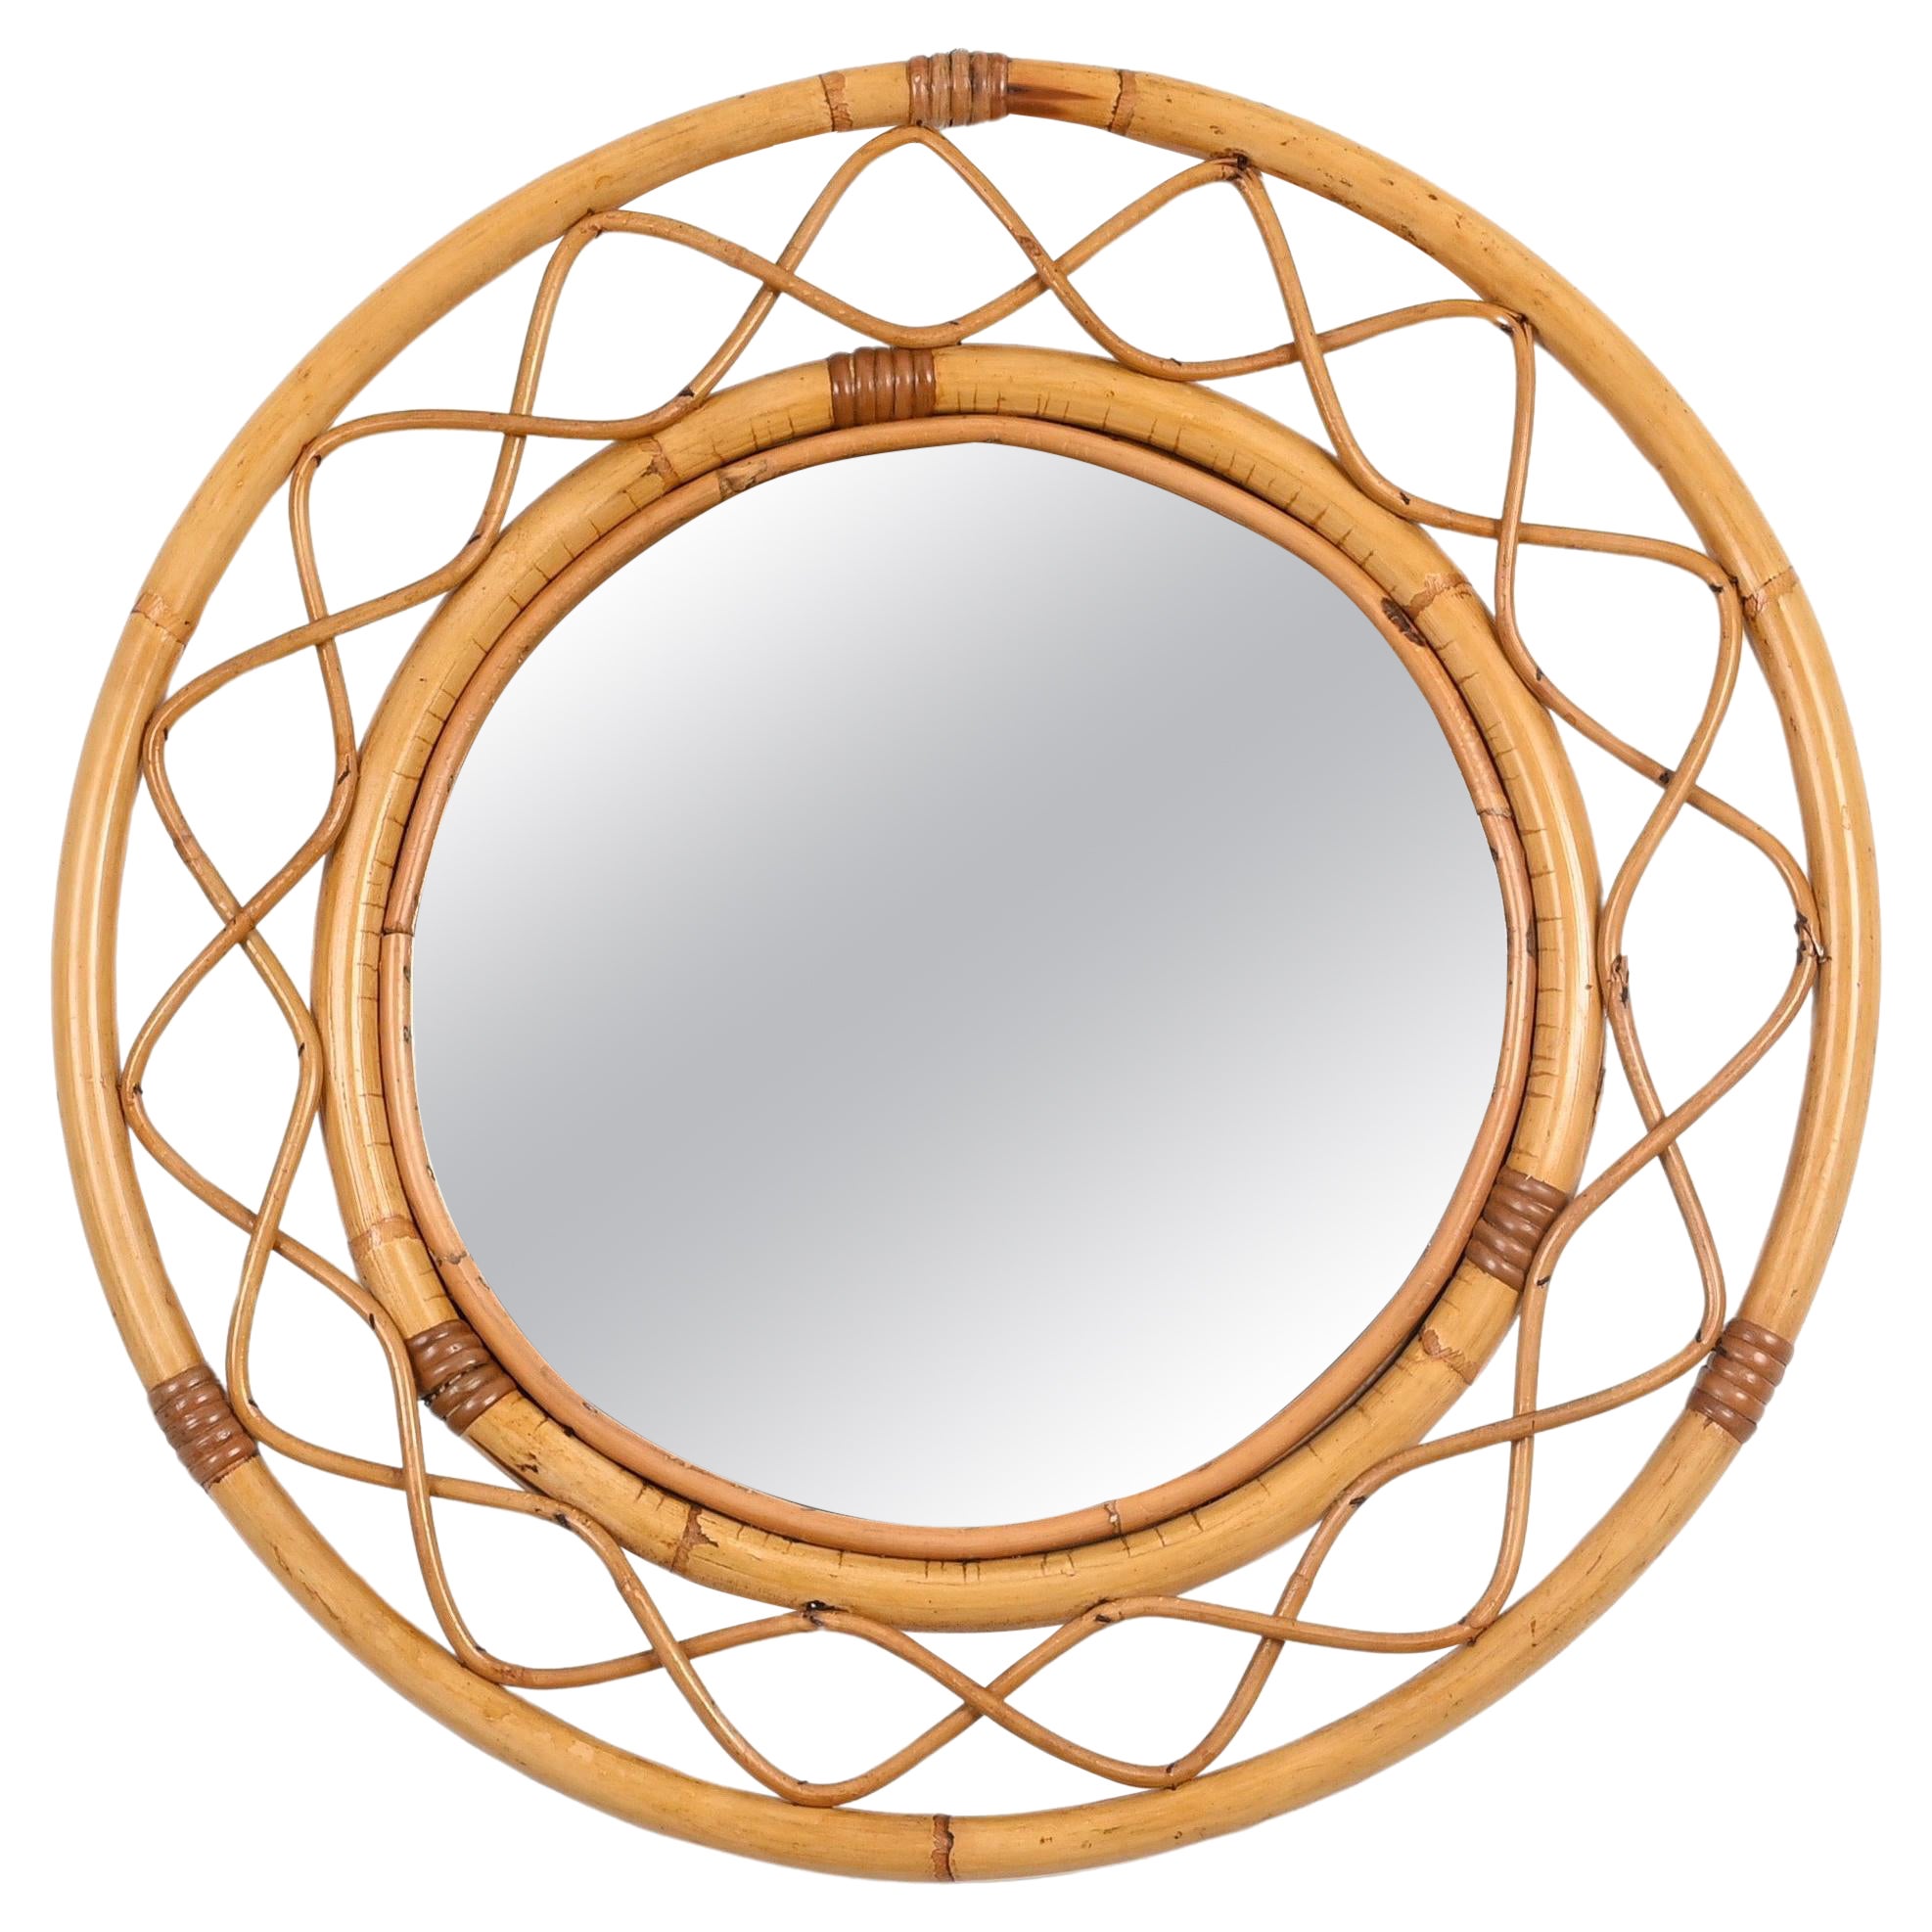 Midcentury Round Italian Mirror, Curved Bamboo, Rattan and Wicker Frame, 1960s For Sale